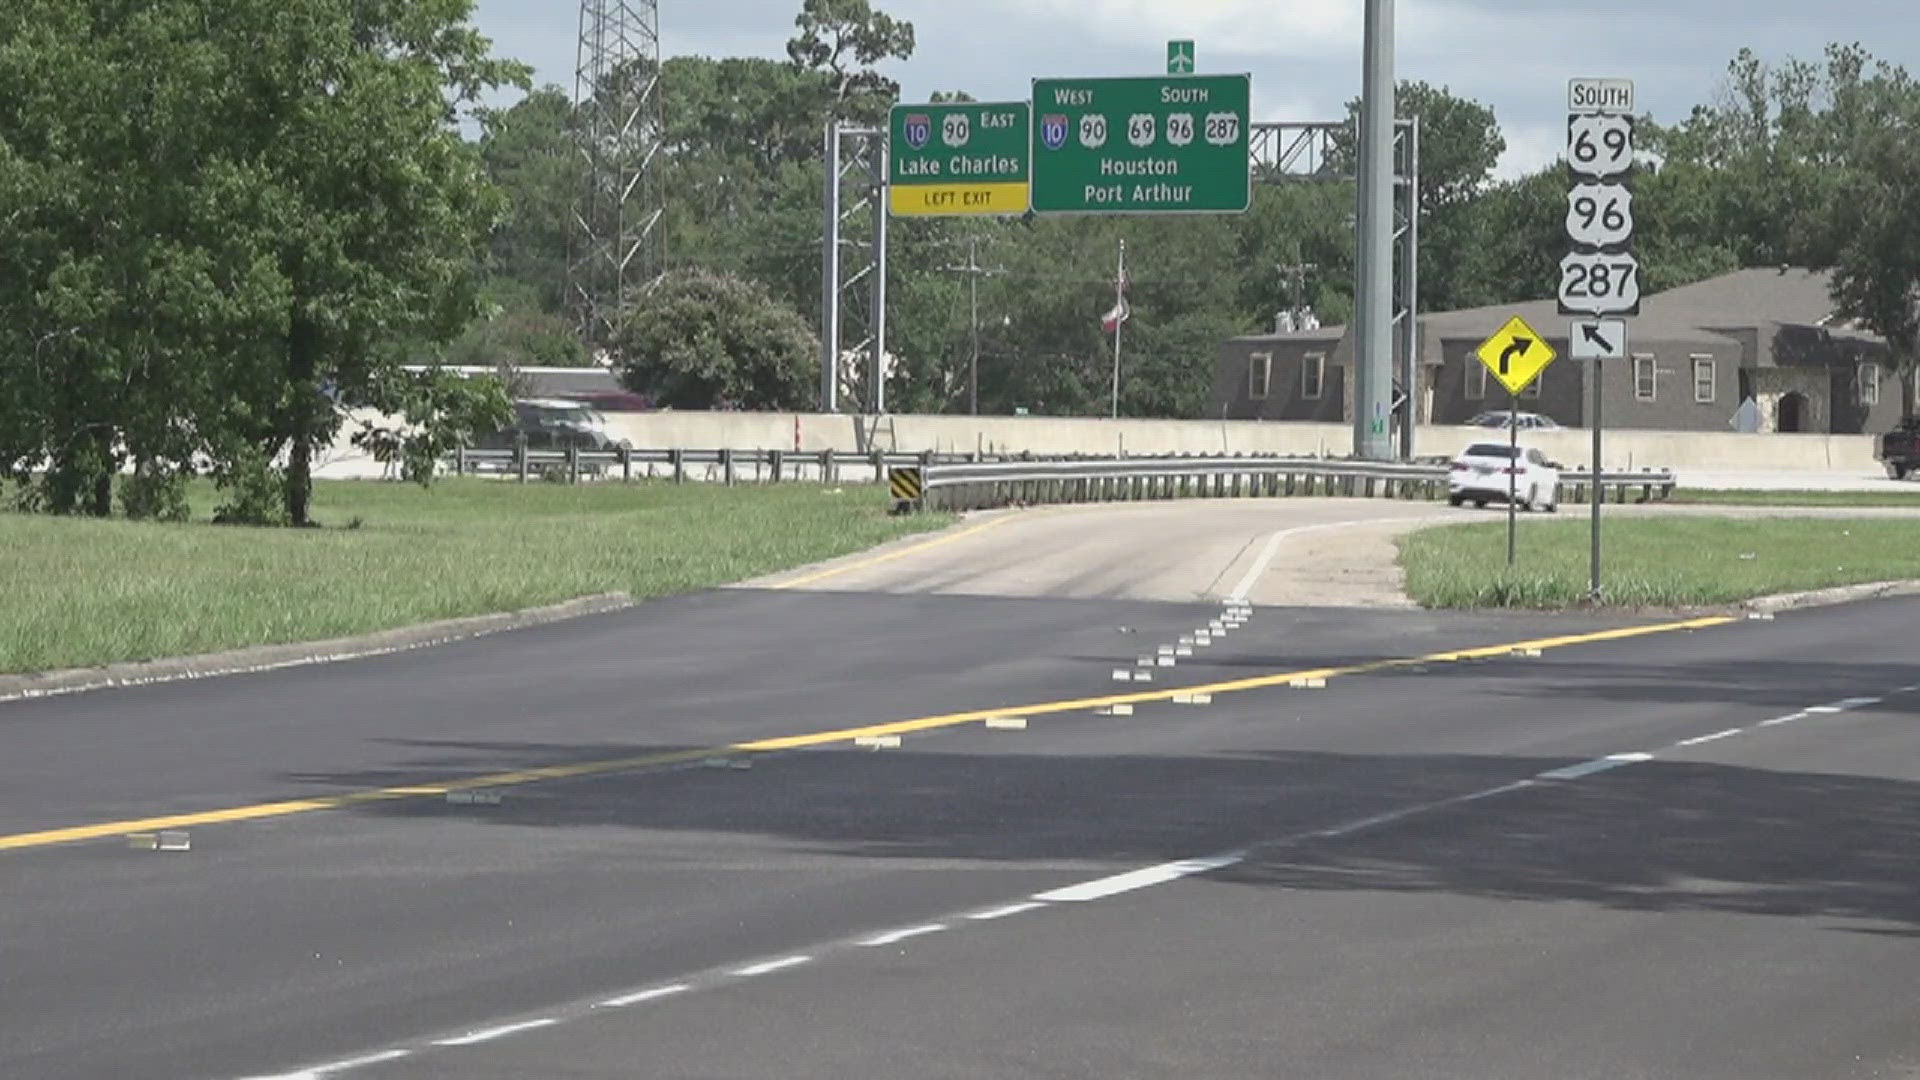 The onramp will be closed for the duration of the interchange project which is projected to be finished in the fall of 2029.